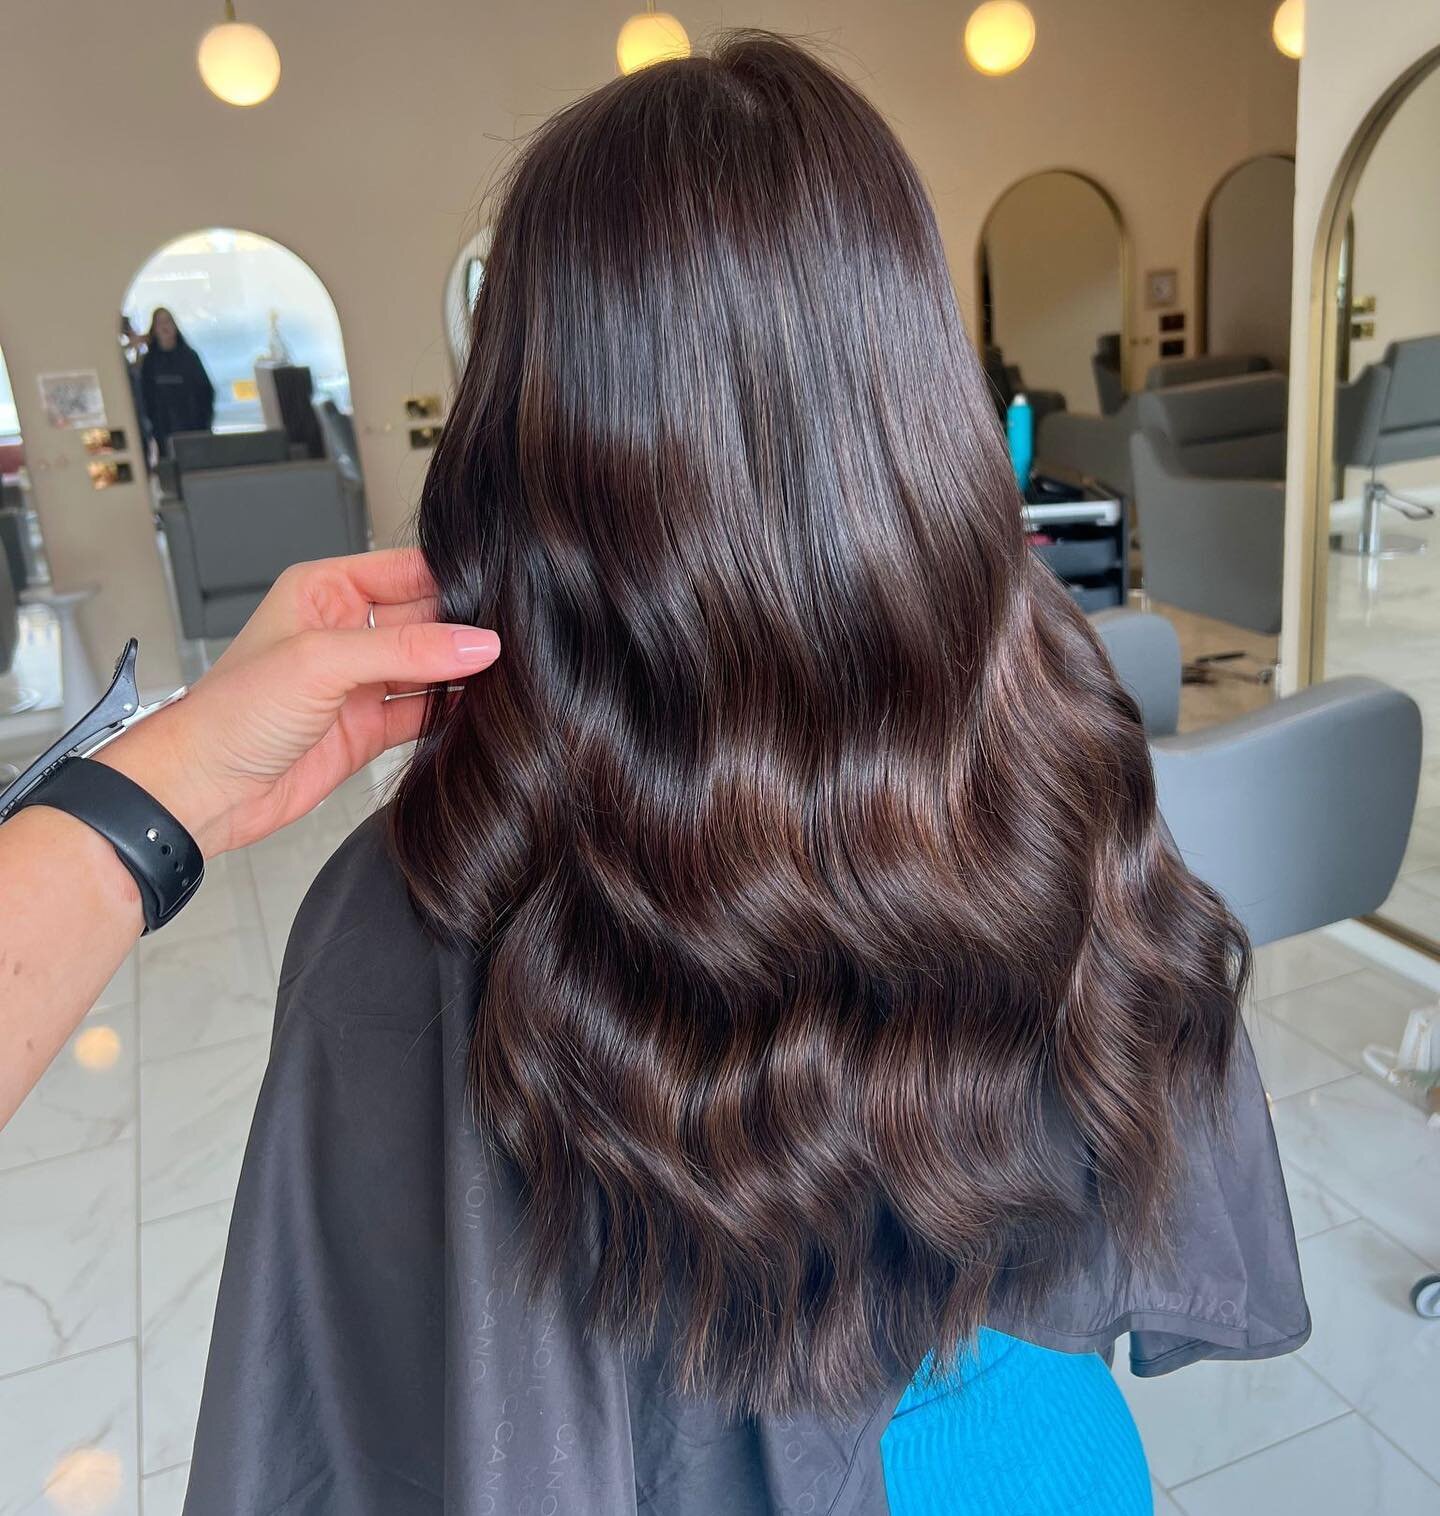 𝑾𝑯𝑨𝑻 𝑬𝑿𝑻𝑬𝑵𝑺𝑰𝑶𝑵𝑺?

Full head tint and a new set of Beauty Works tape extensions in Ebony and Dark Chocolate for Char&rsquo;s gorgeous new client, giving a gorgeous multi tonal finish.

Service: Full Head Tint with Blowdry, and 150g Tape 